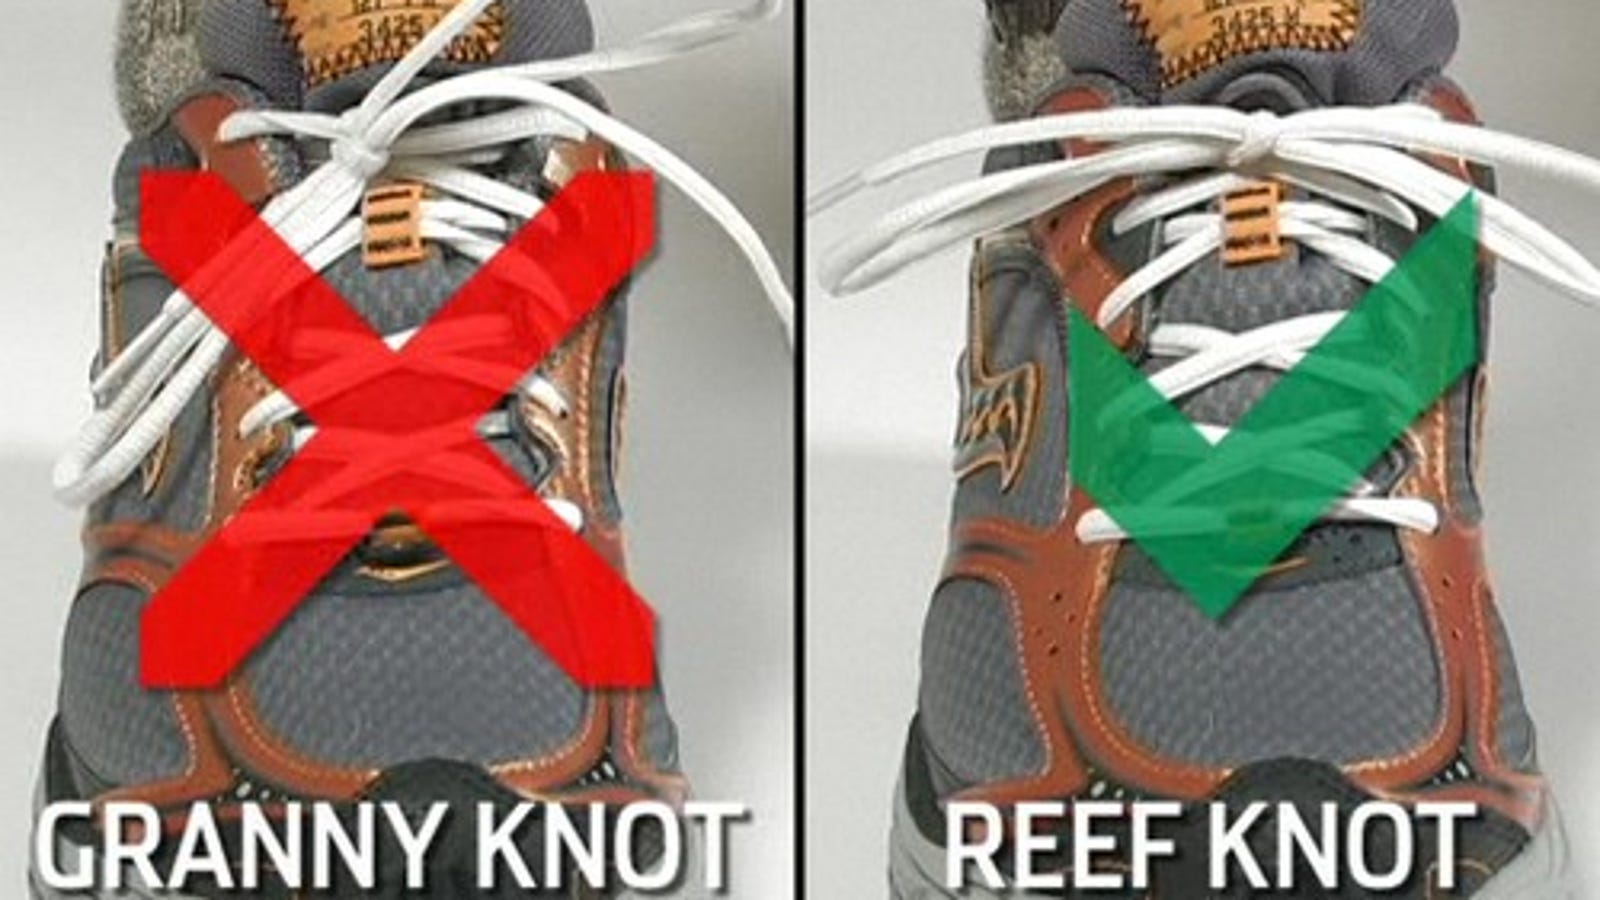 Ditch the Granny Knot to Tie Your Shoes More Efficiently